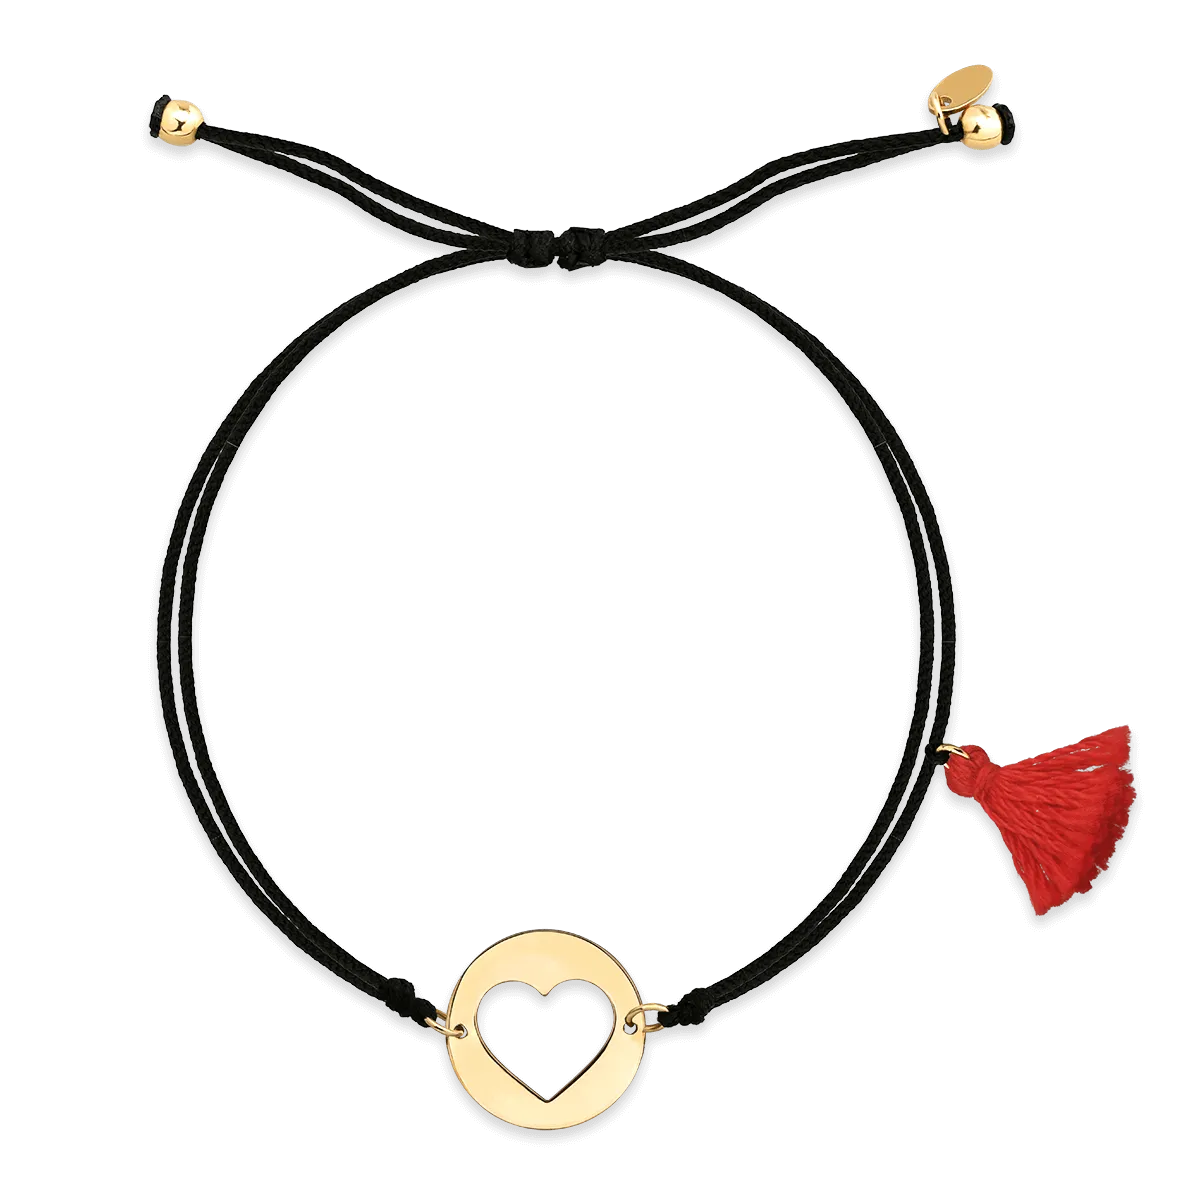 Black cord bracelet with 14K yellow gold and heart charm